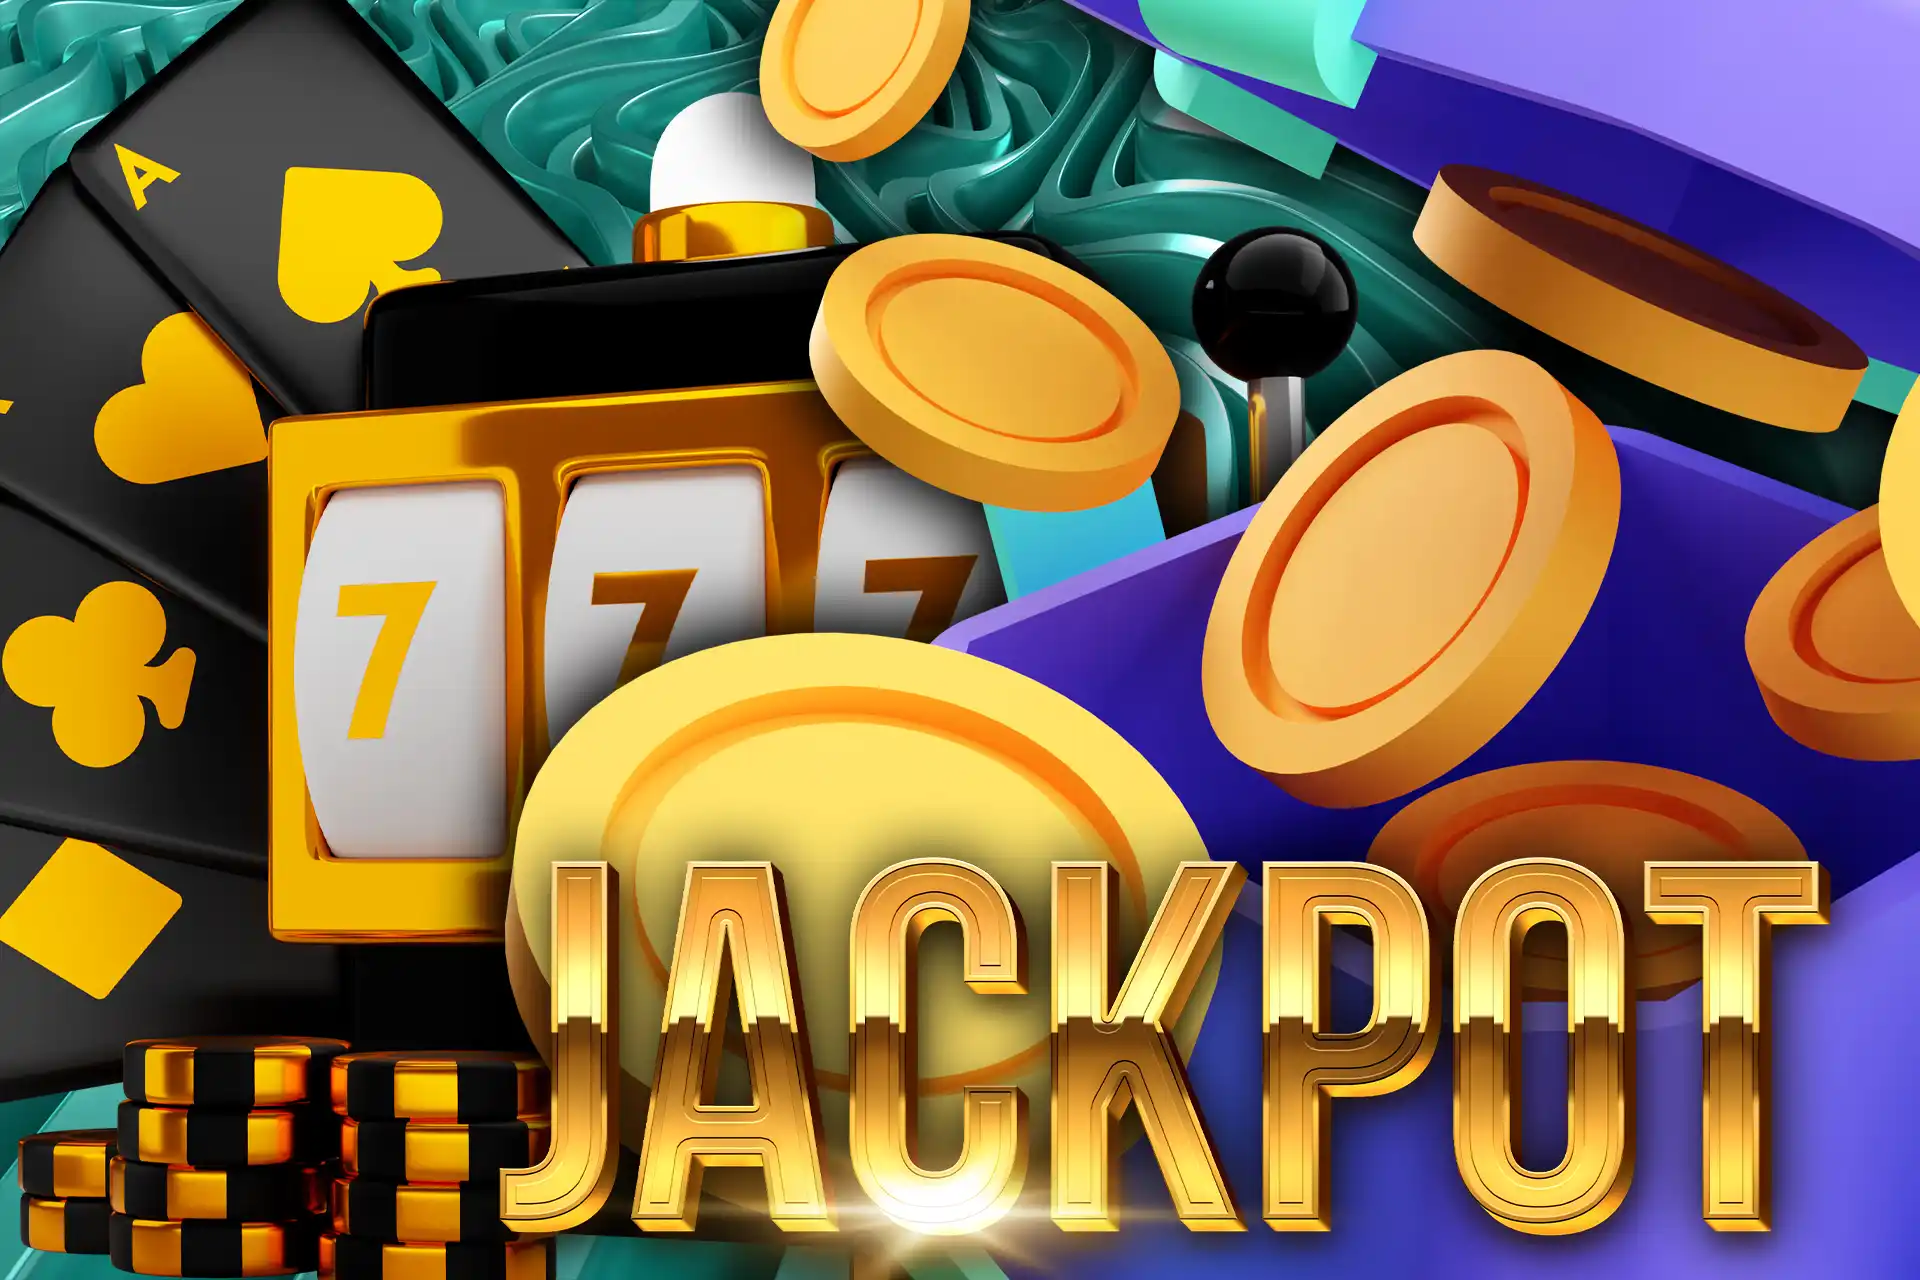 Play jackpot games to win big prizes.